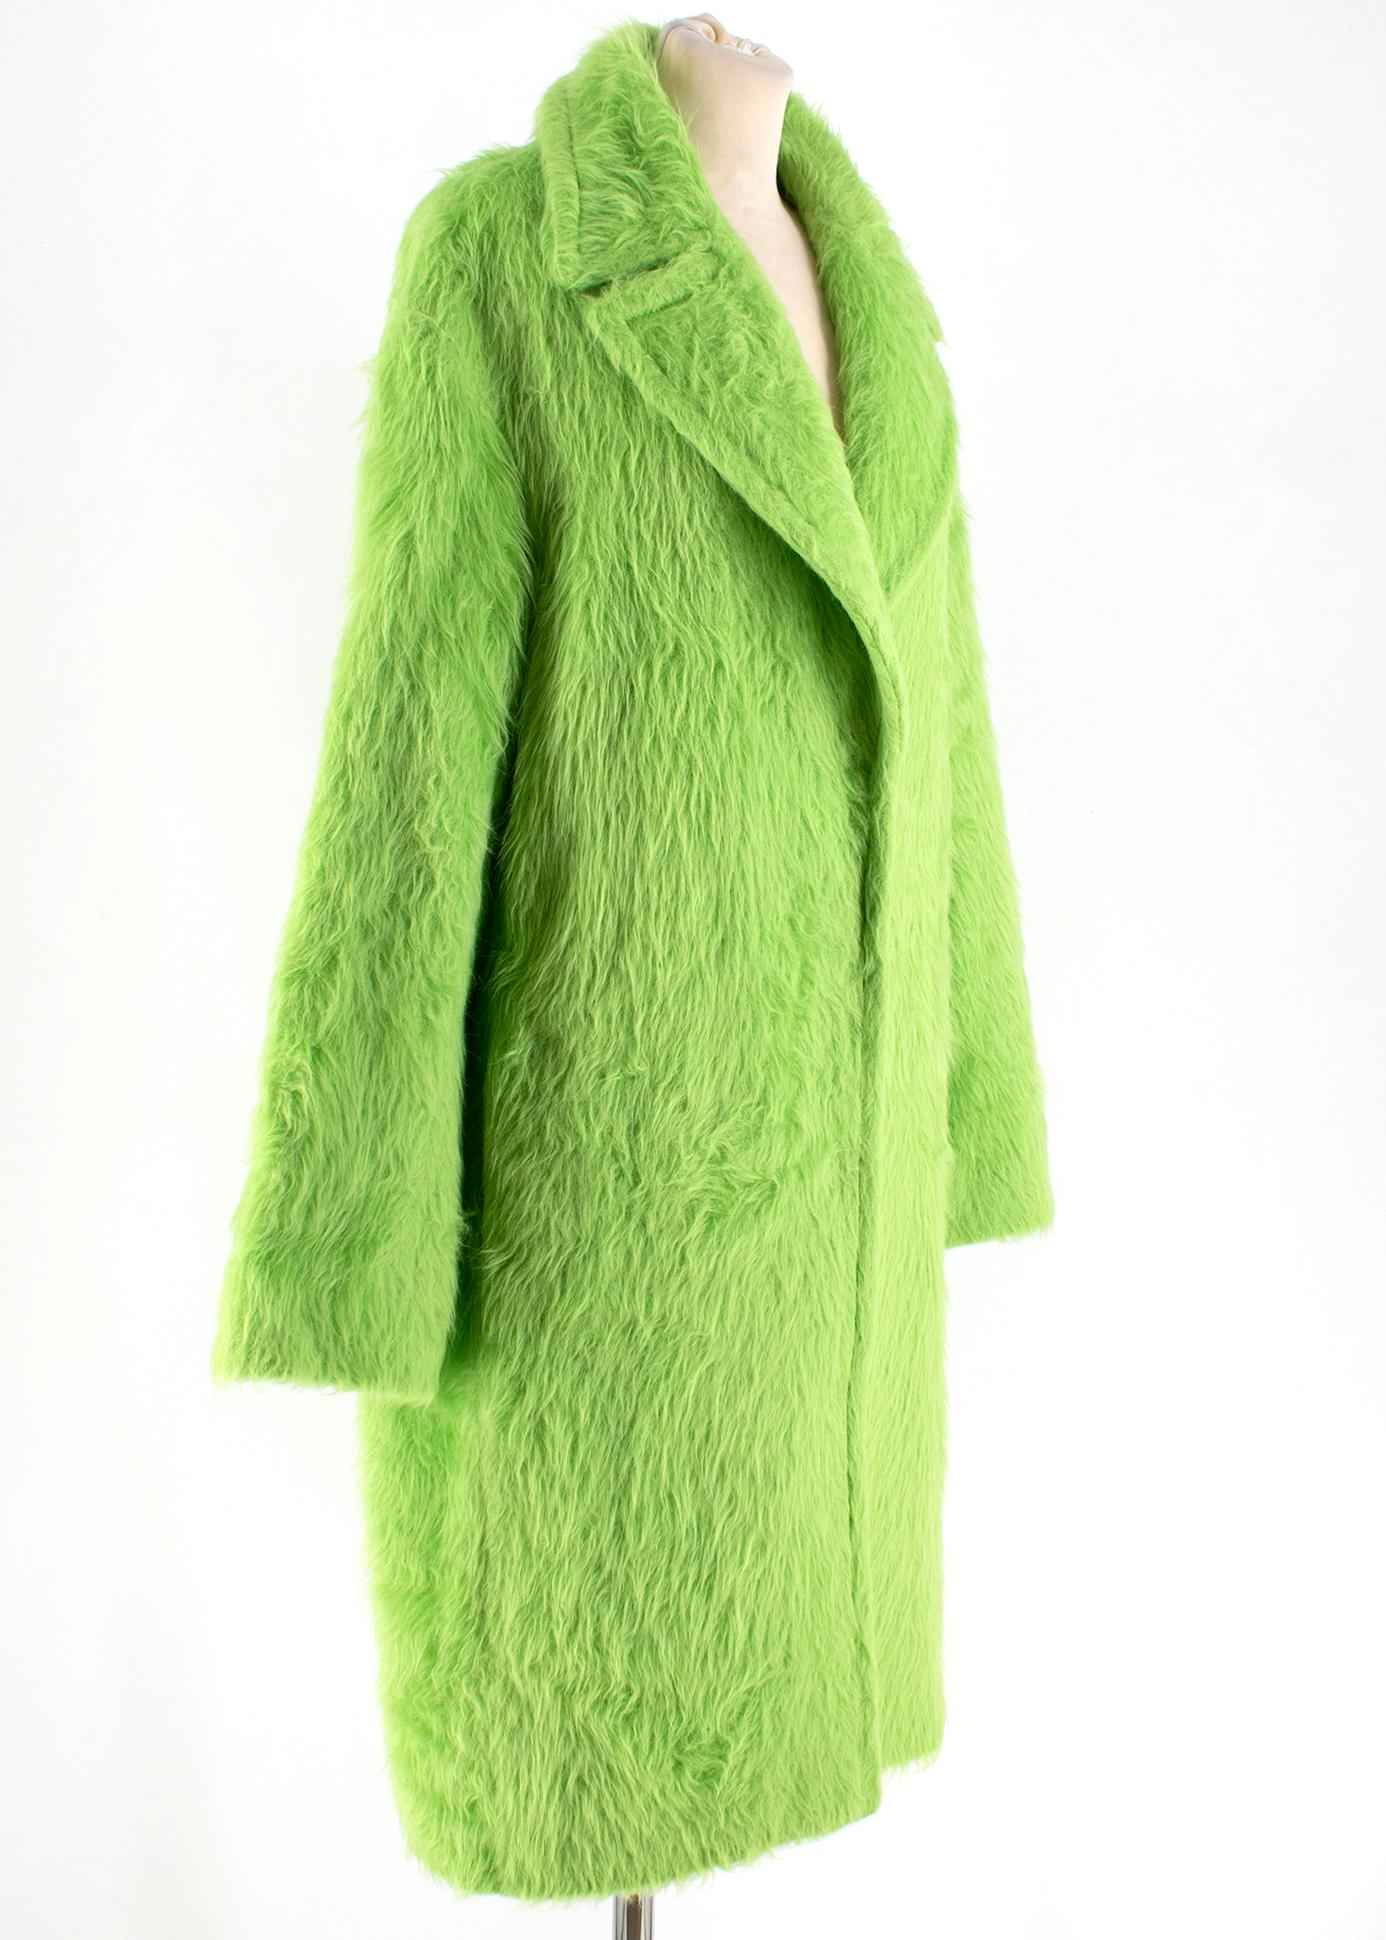 Emilio Pucci Green Alpaca and Wool Blend Coat

Soft alpaca and wool blend coat, 
Long sleeves,
Standard notch collar,
Front centre snap button closure,
Features side pockets, 
Single back vent 
Interior features multicolour